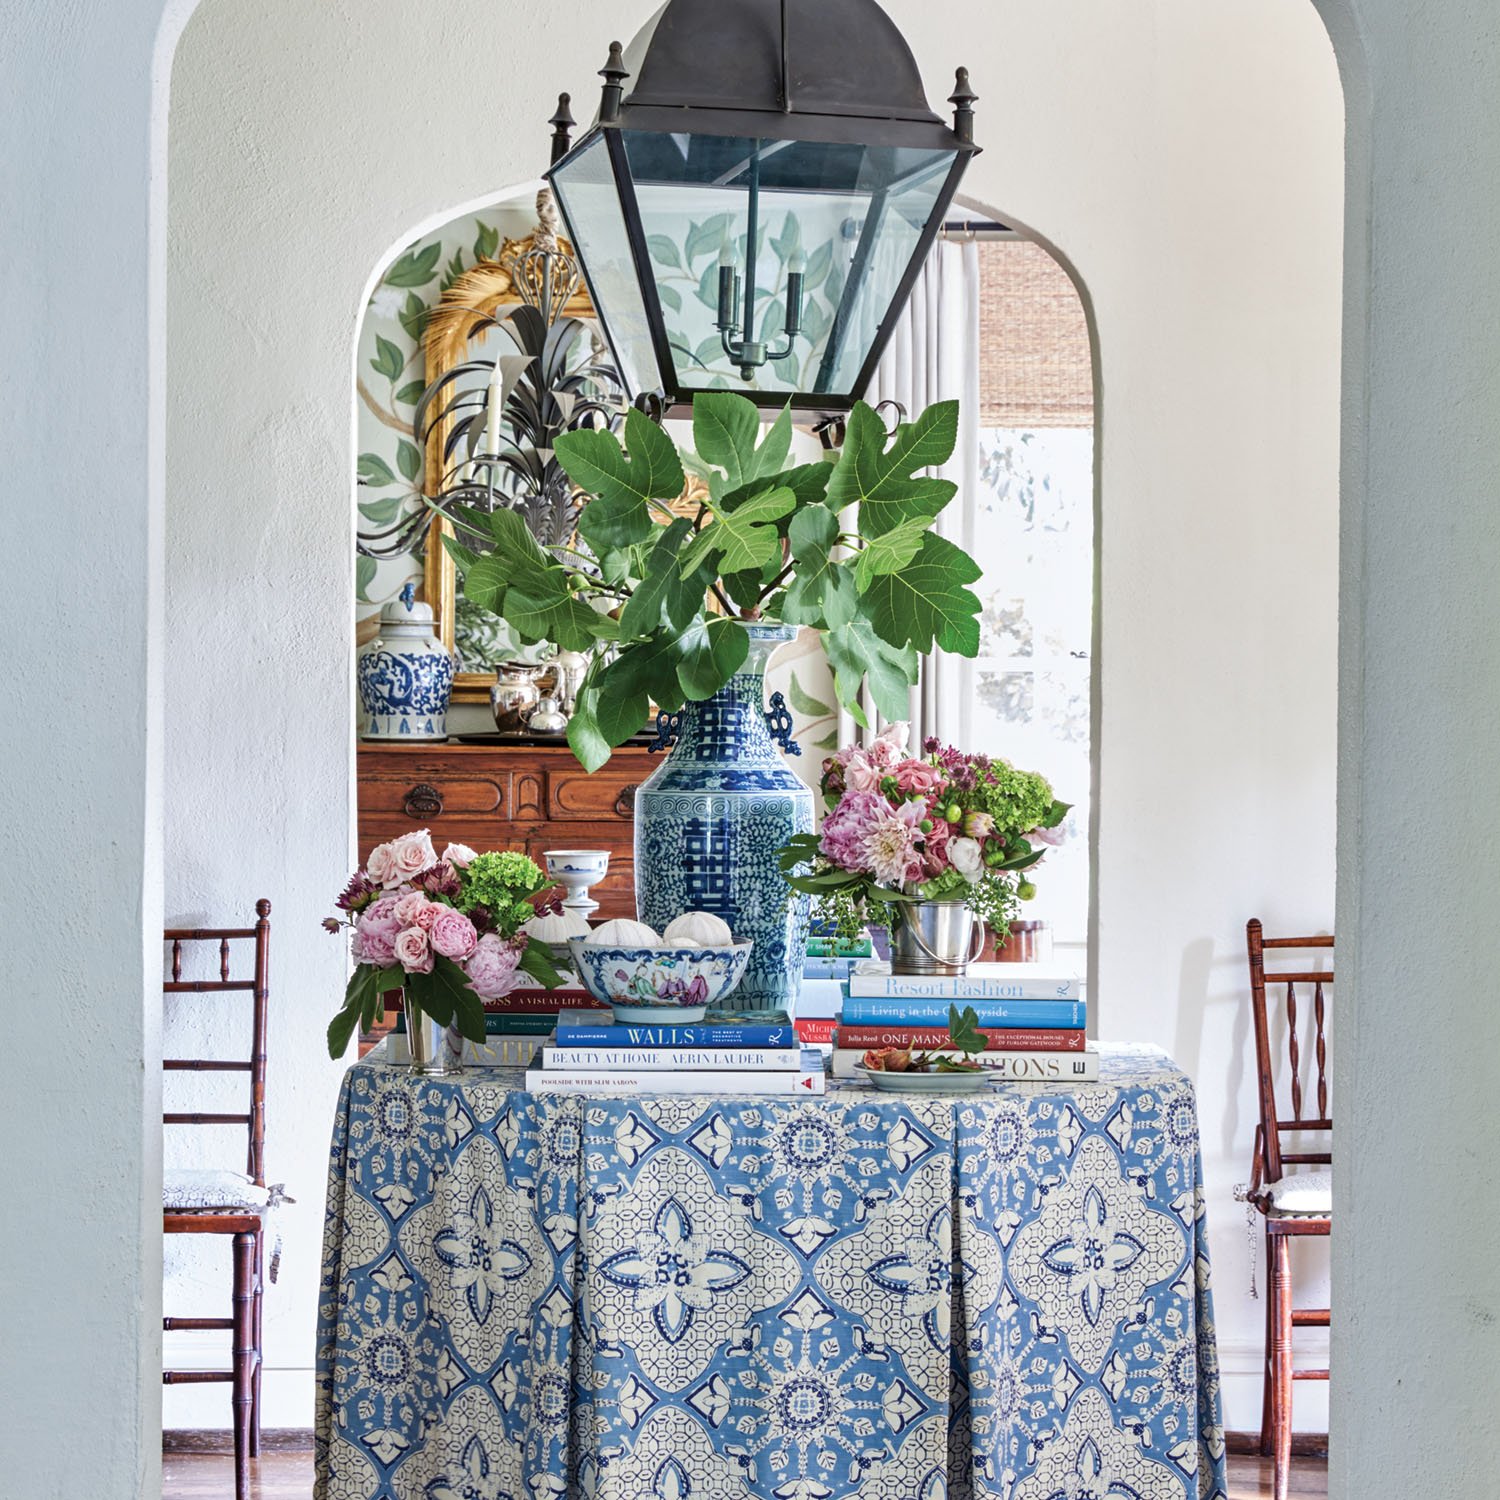 A round table in an entry is topped with a tailored blue-and-white table skirt, blue-and-white pottery, books, and floral arrangements.